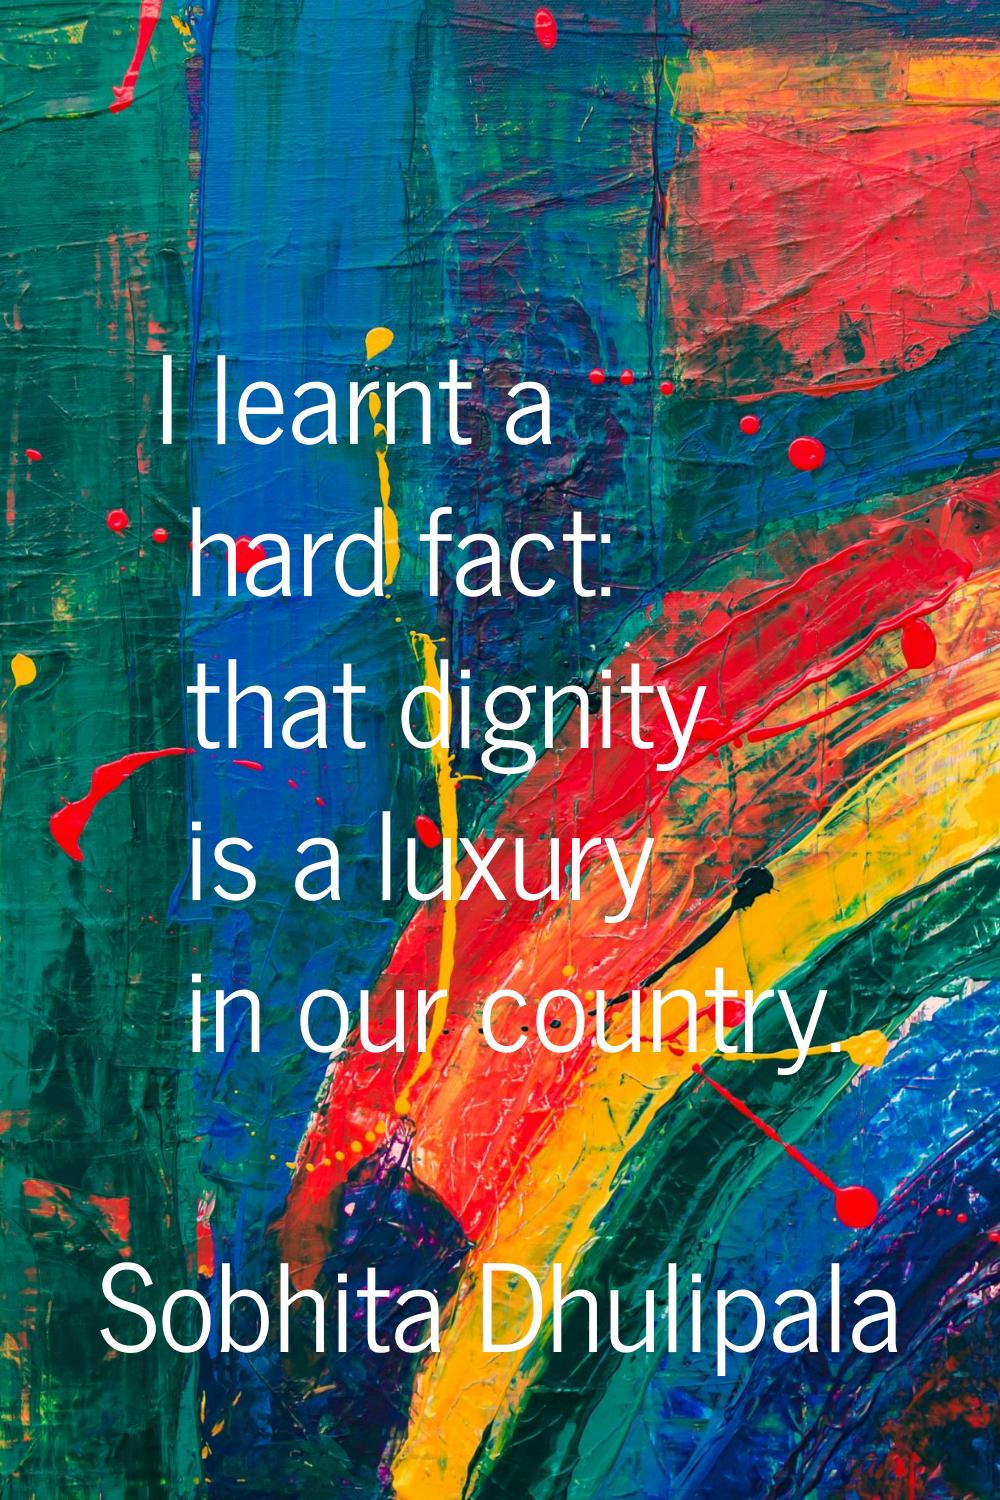 I learnt a hard fact: that dignity is a luxury in our country.